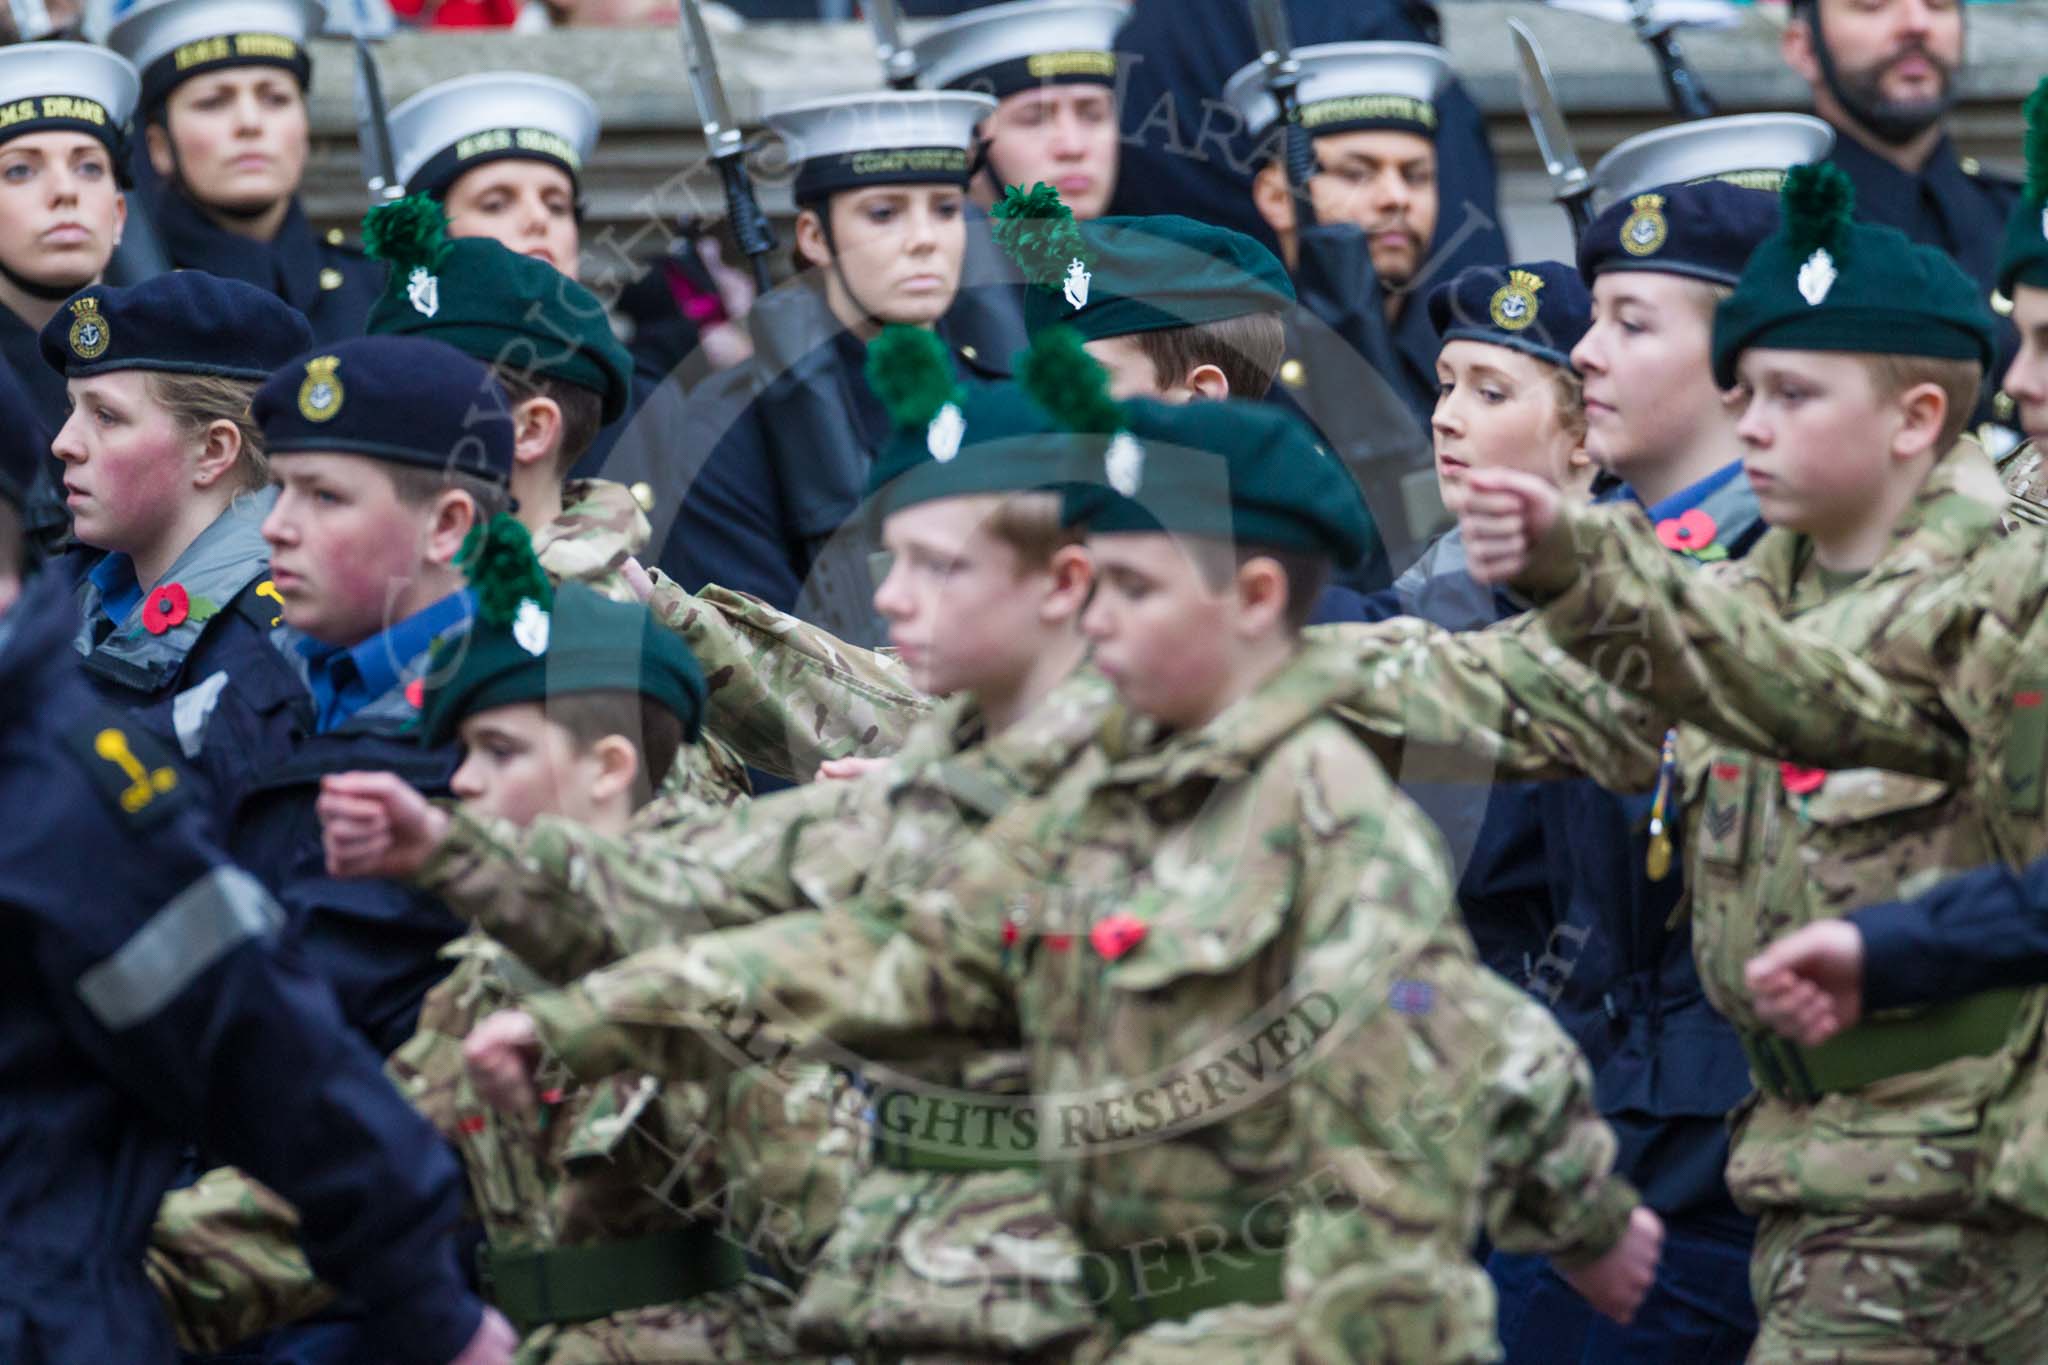 Remembrance Sunday at the Cenotaph 2015: Group M46, Sea Cadet Corps.
Cenotaph, Whitehall, London SW1,
London,
Greater London,
United Kingdom,
on 08 November 2015 at 12:20, image #1694